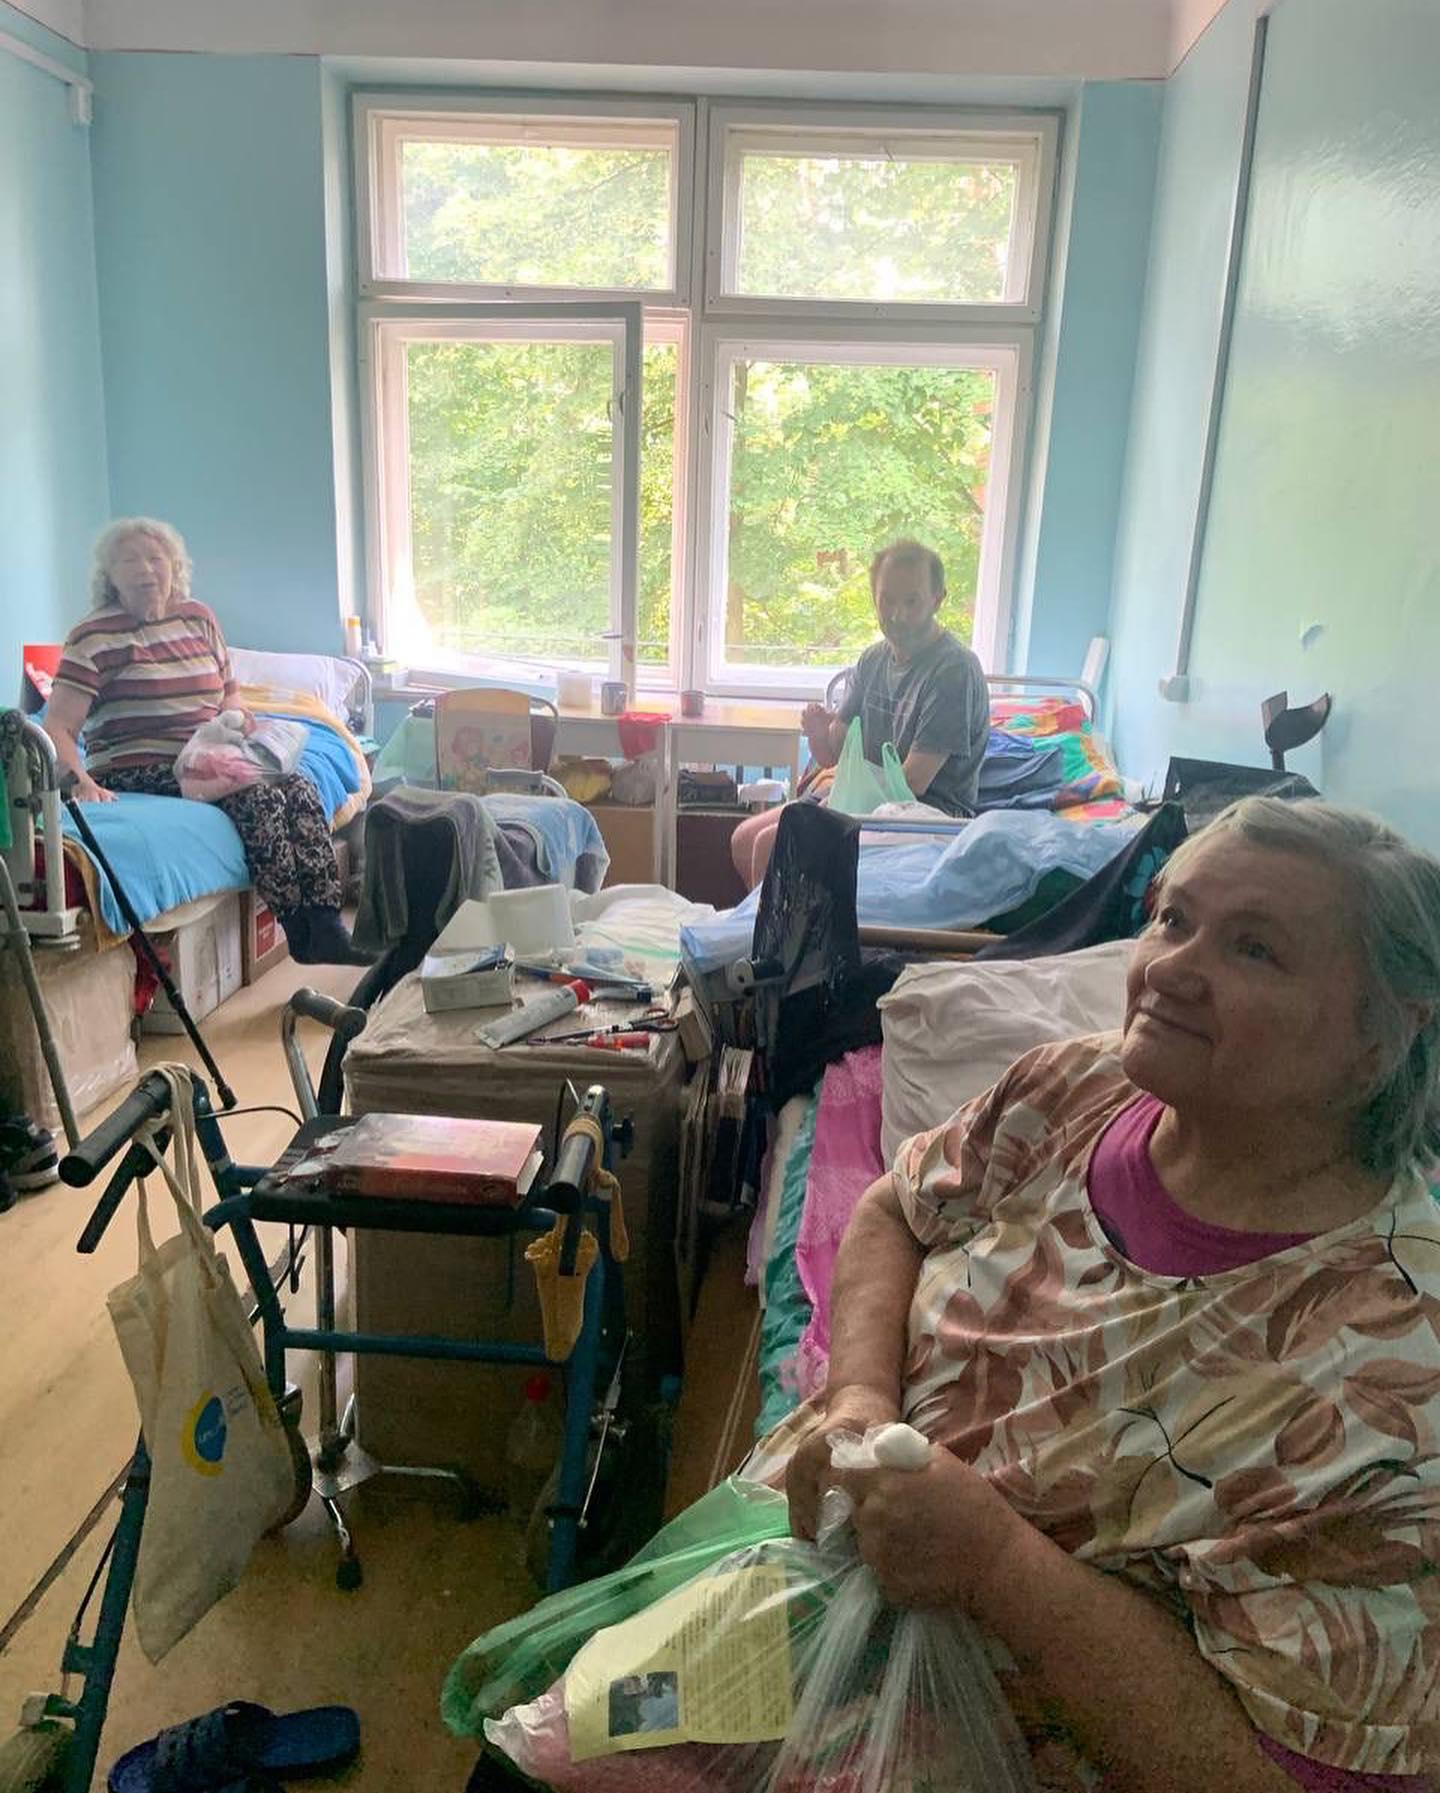 a group of elderly people sitting in a room.